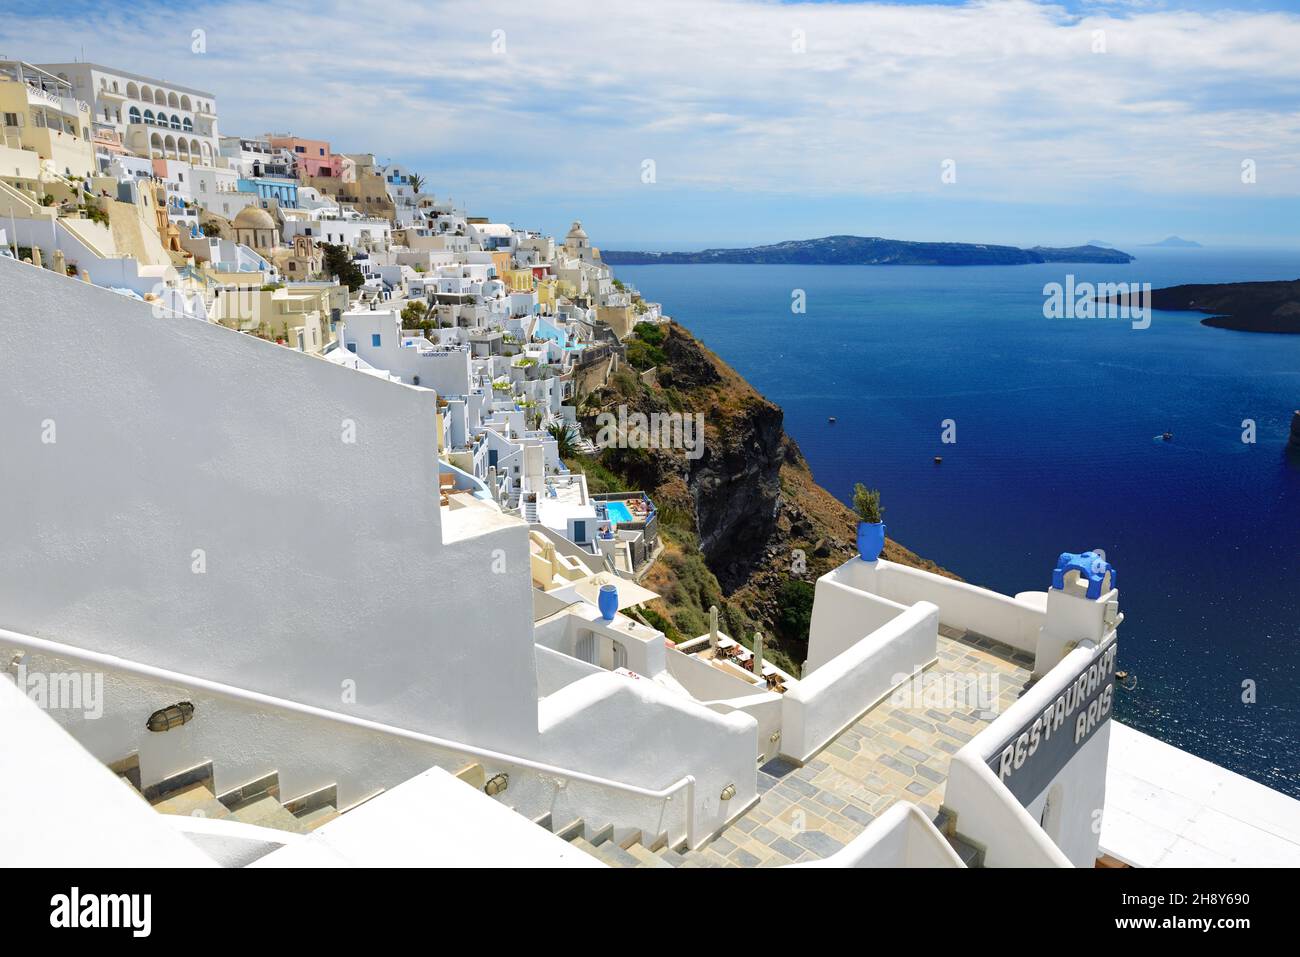 FIRA, GREECE - MAY 17: The view on Fira town and tourists enjoying their vacation on May 17, 2014 in Fira, Greece. Up to 16 mln tourists is expected t Stock Photo